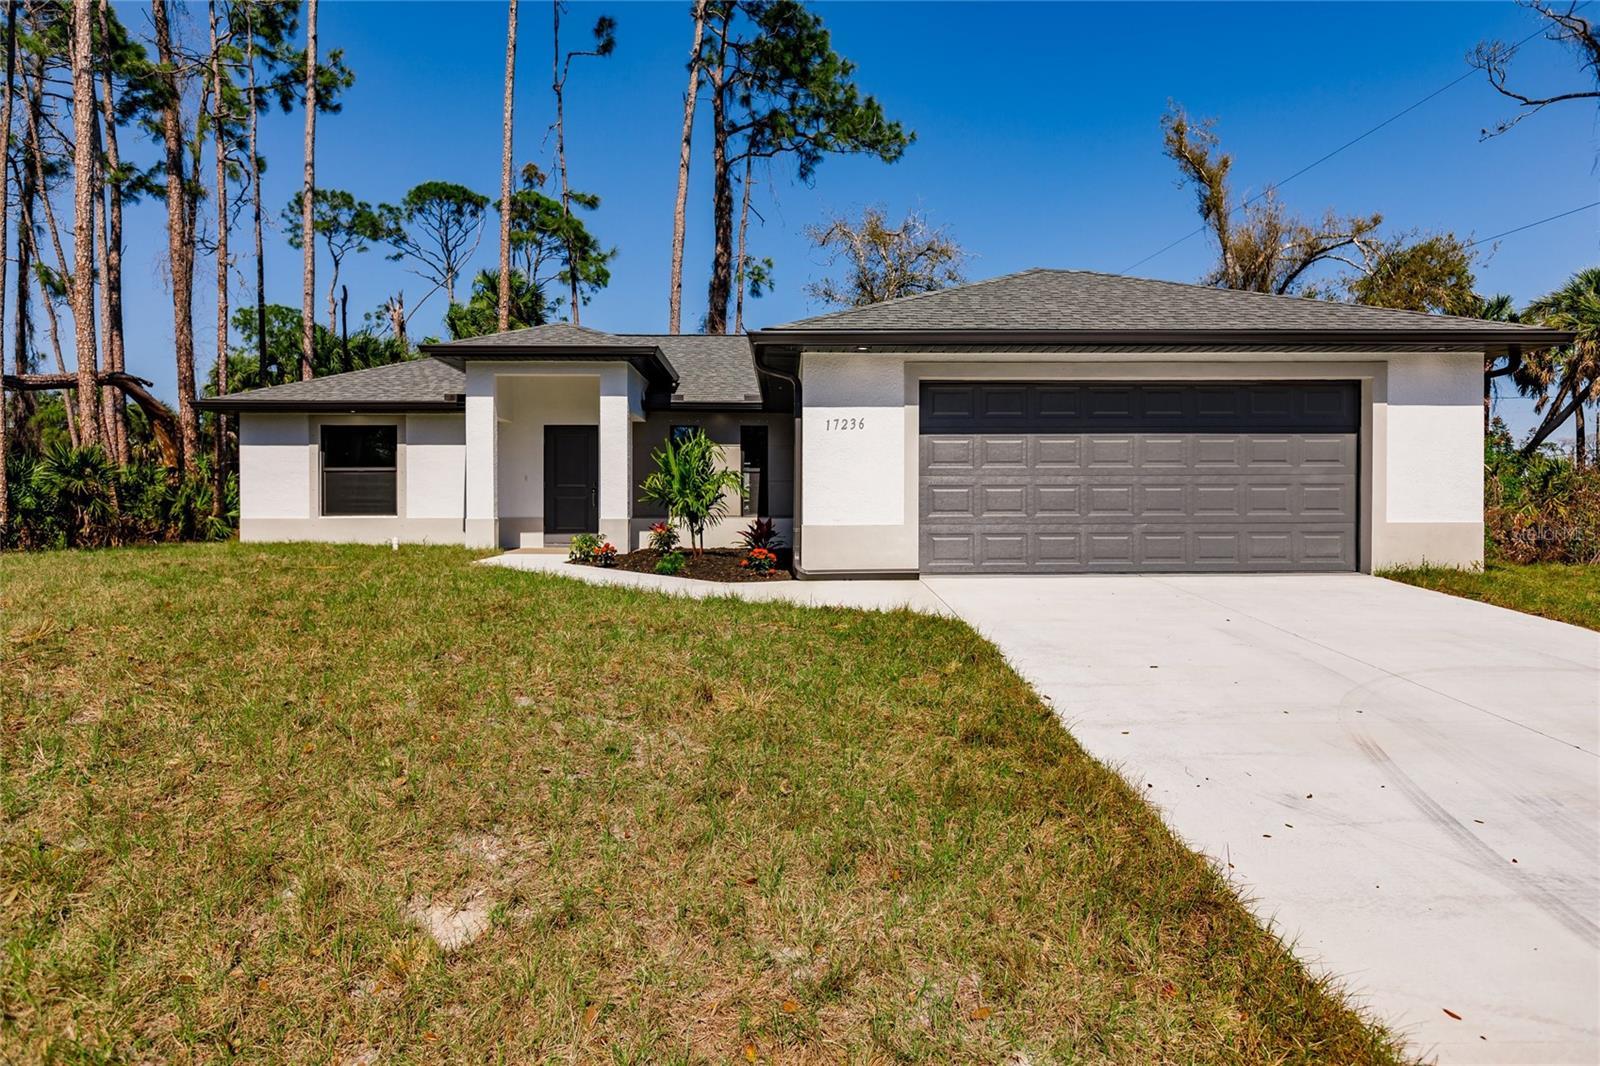 Photo one of 17236 Russell Ave Port Charlotte FL 33954 | MLS C7488072